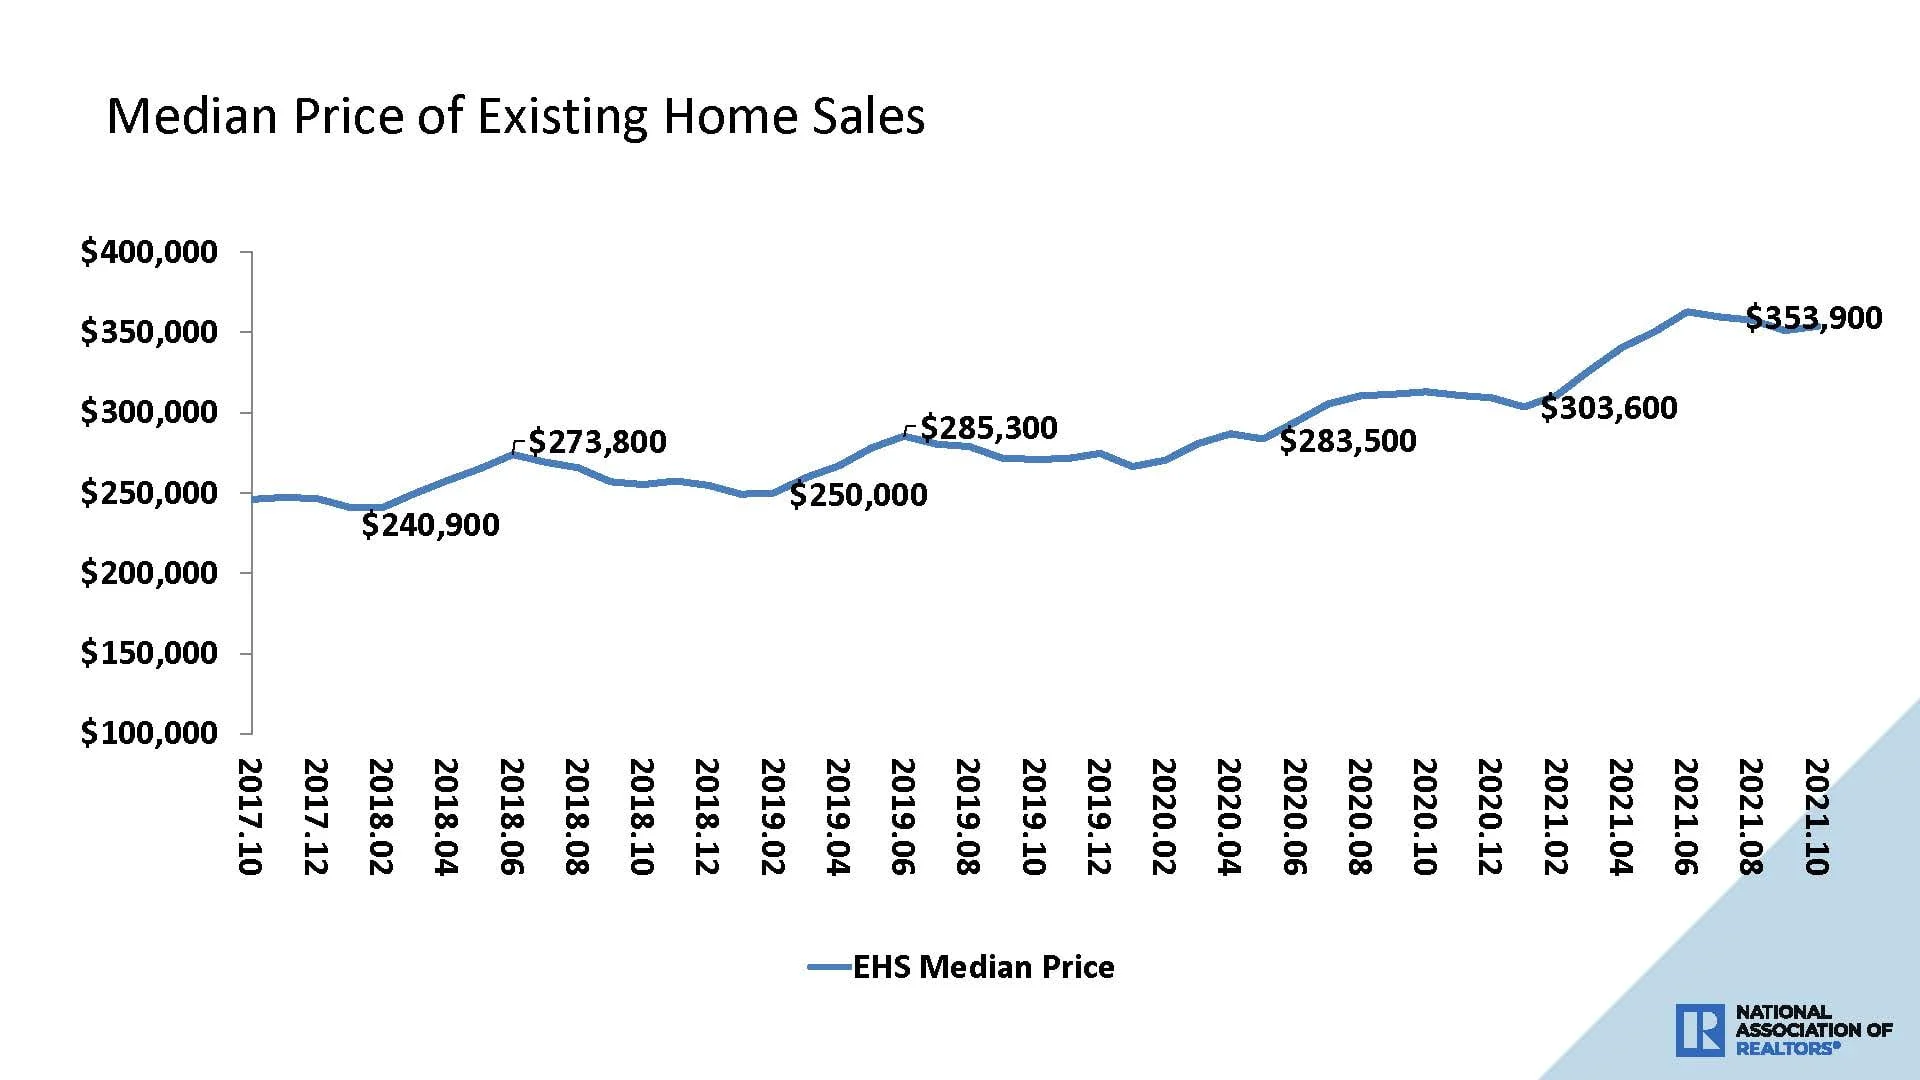 a graph showing the median price of existing home sales